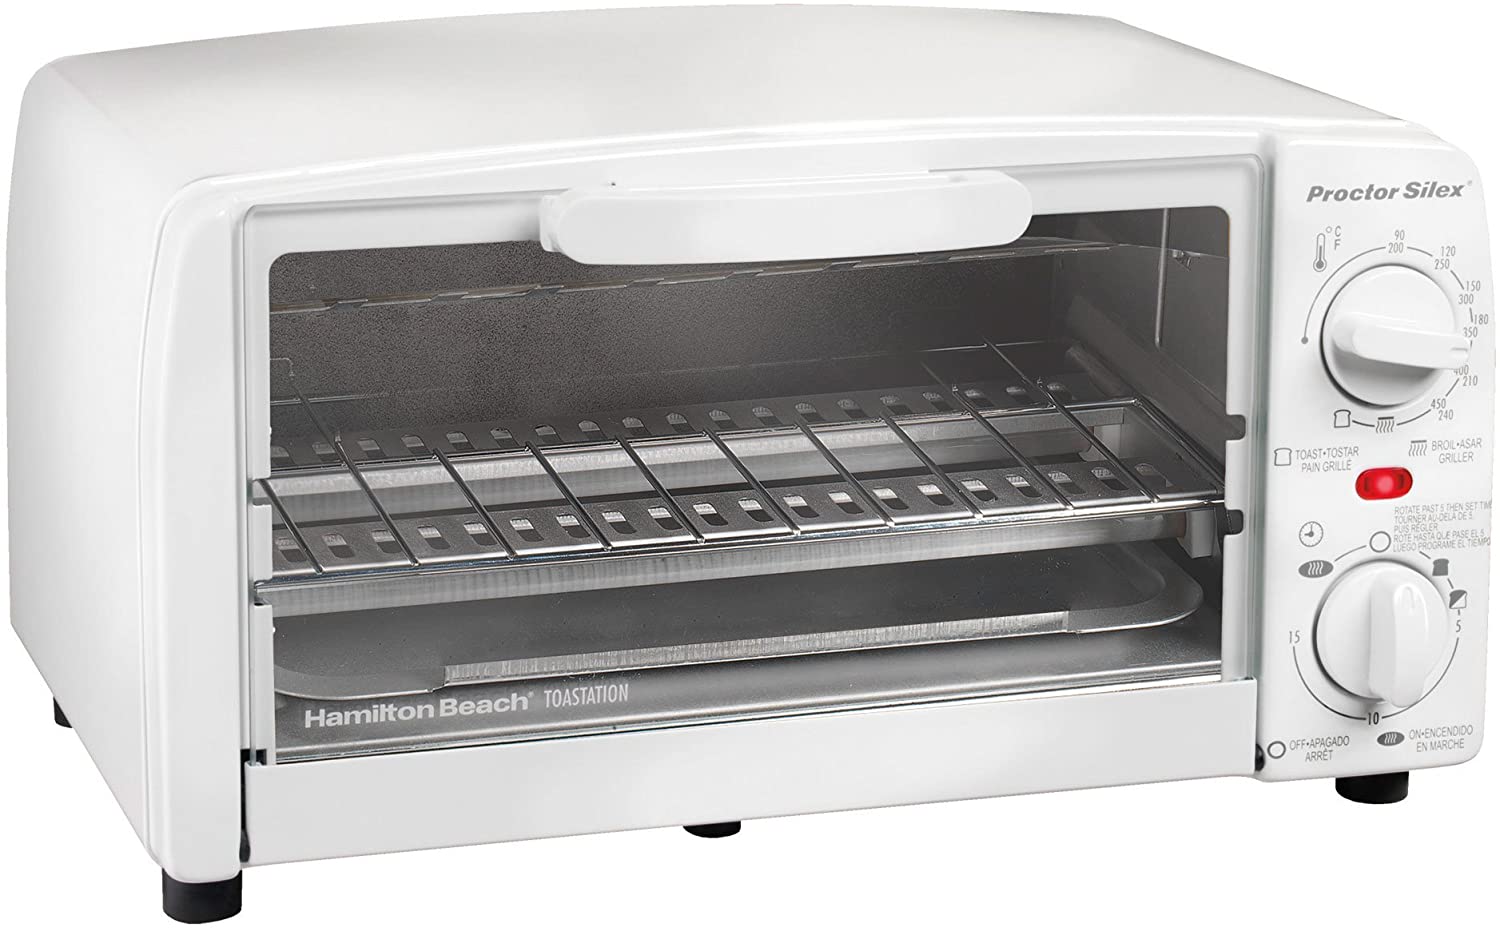 31260 Black and Silver Includes Backing Pan and Rack 1100 Watts 30 min timer and auto-shutoff Toast and Broiler Proctor-Silex 4 Slice Toaster Oven Multi-Function with Bake 